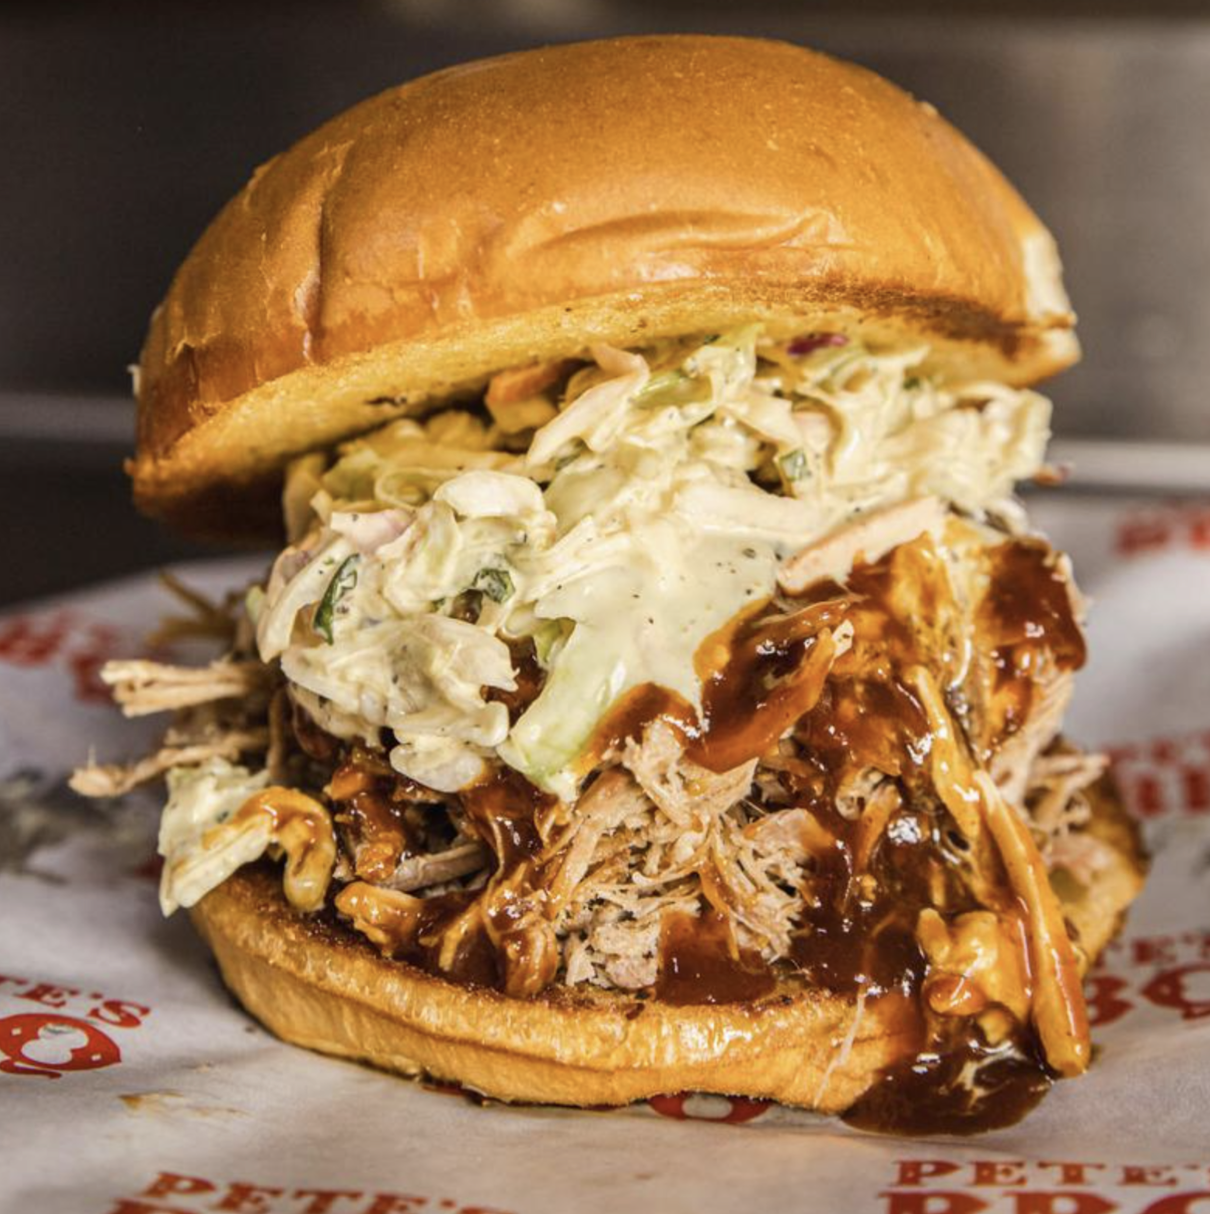 Pulled pork burger stacked high with pulled pork and coleslaw